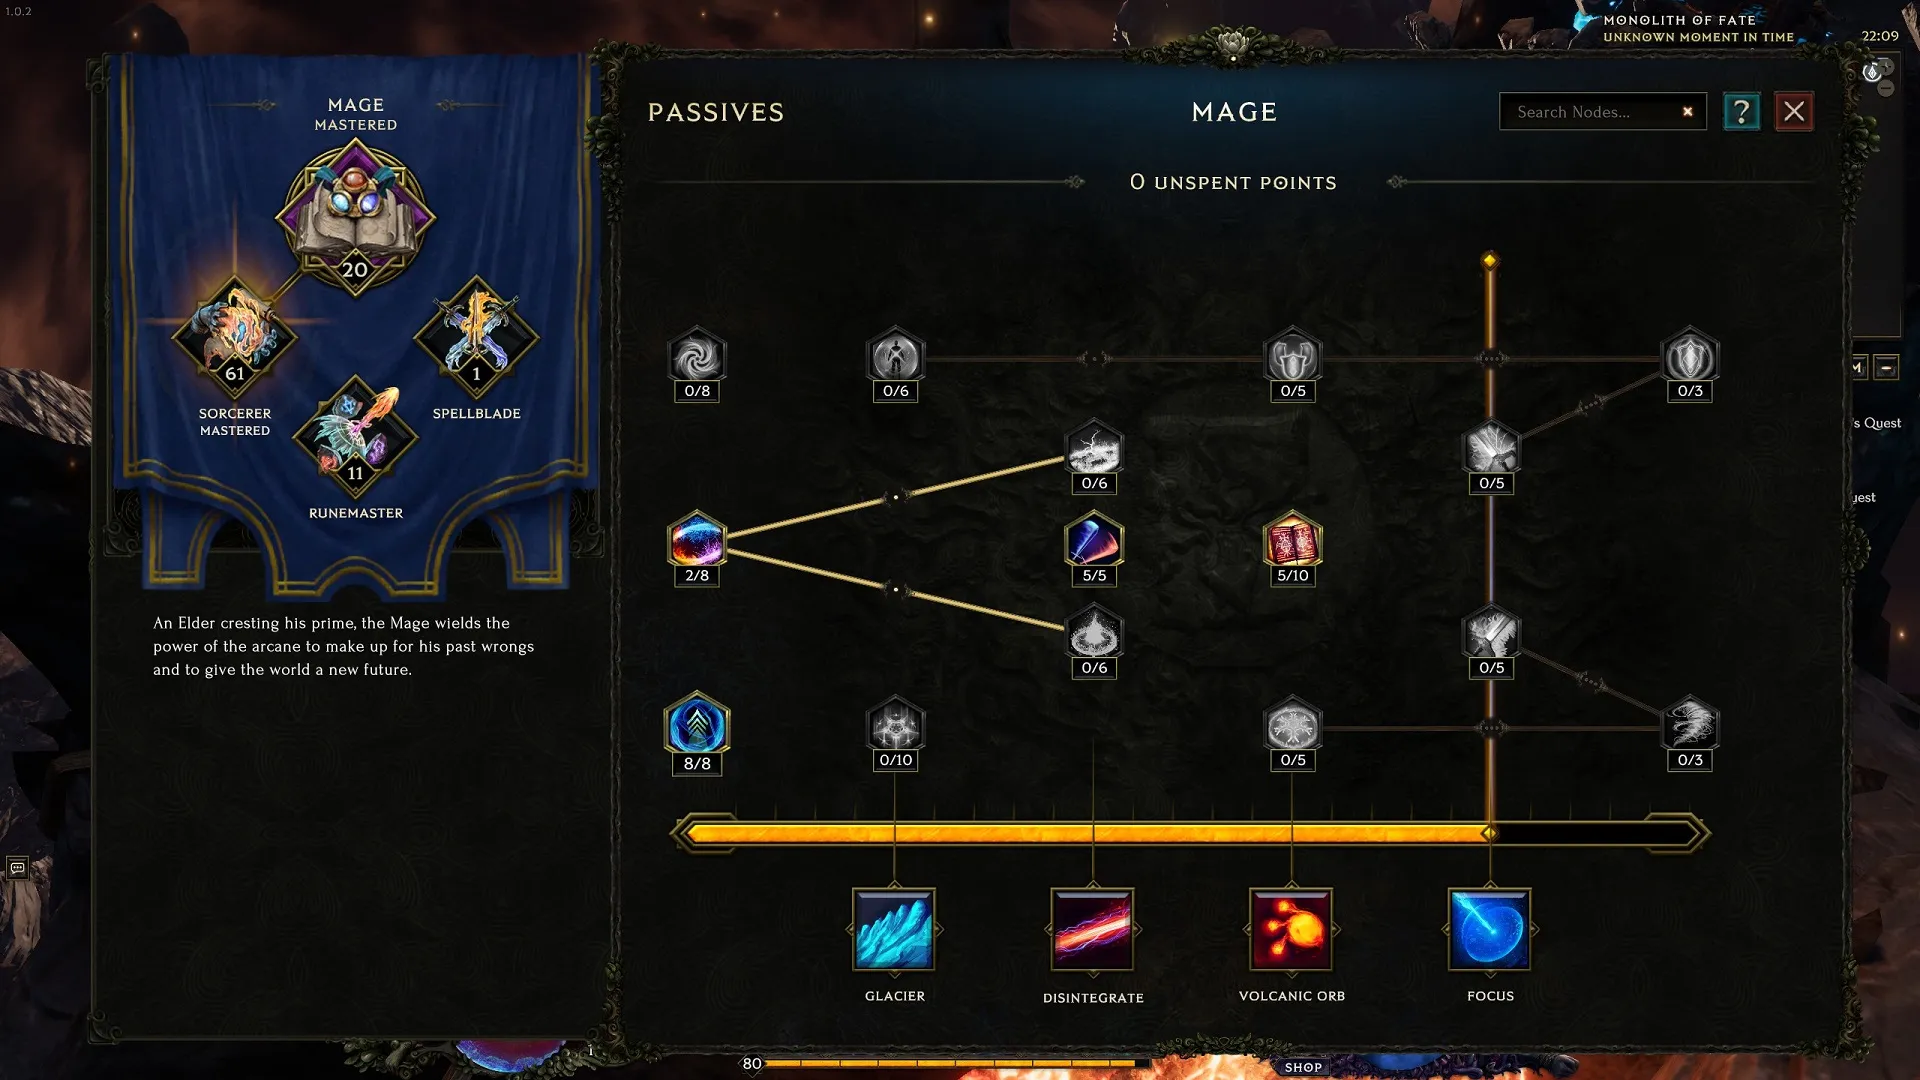 An image of the Mage's passives in Last Epoch.